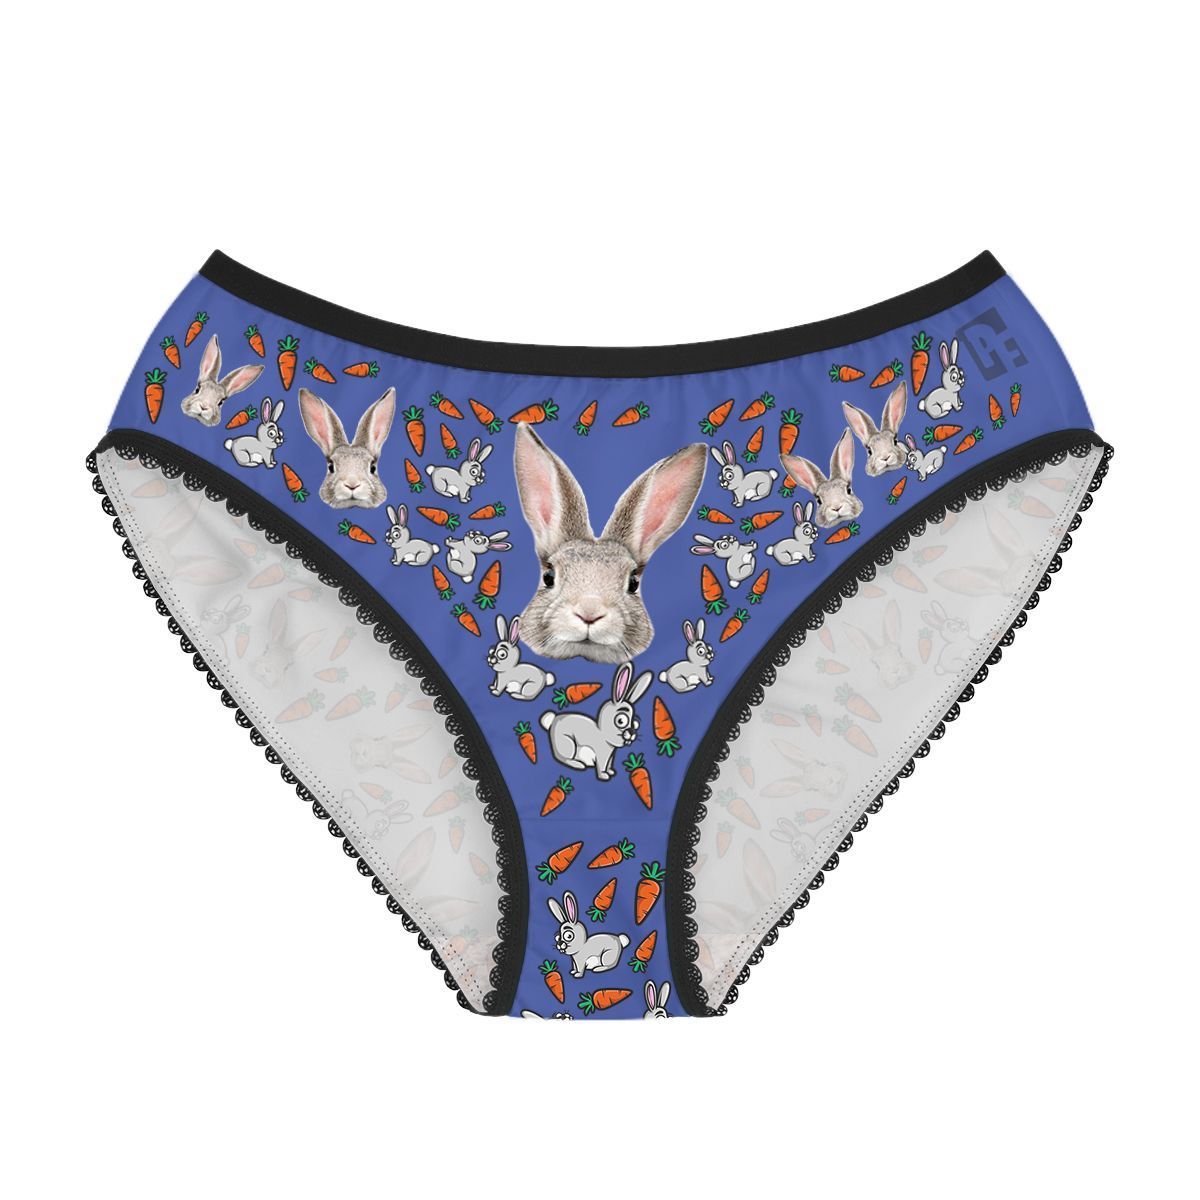 Darkblue Bunny women's underwear briefs personalized with photo printed on them